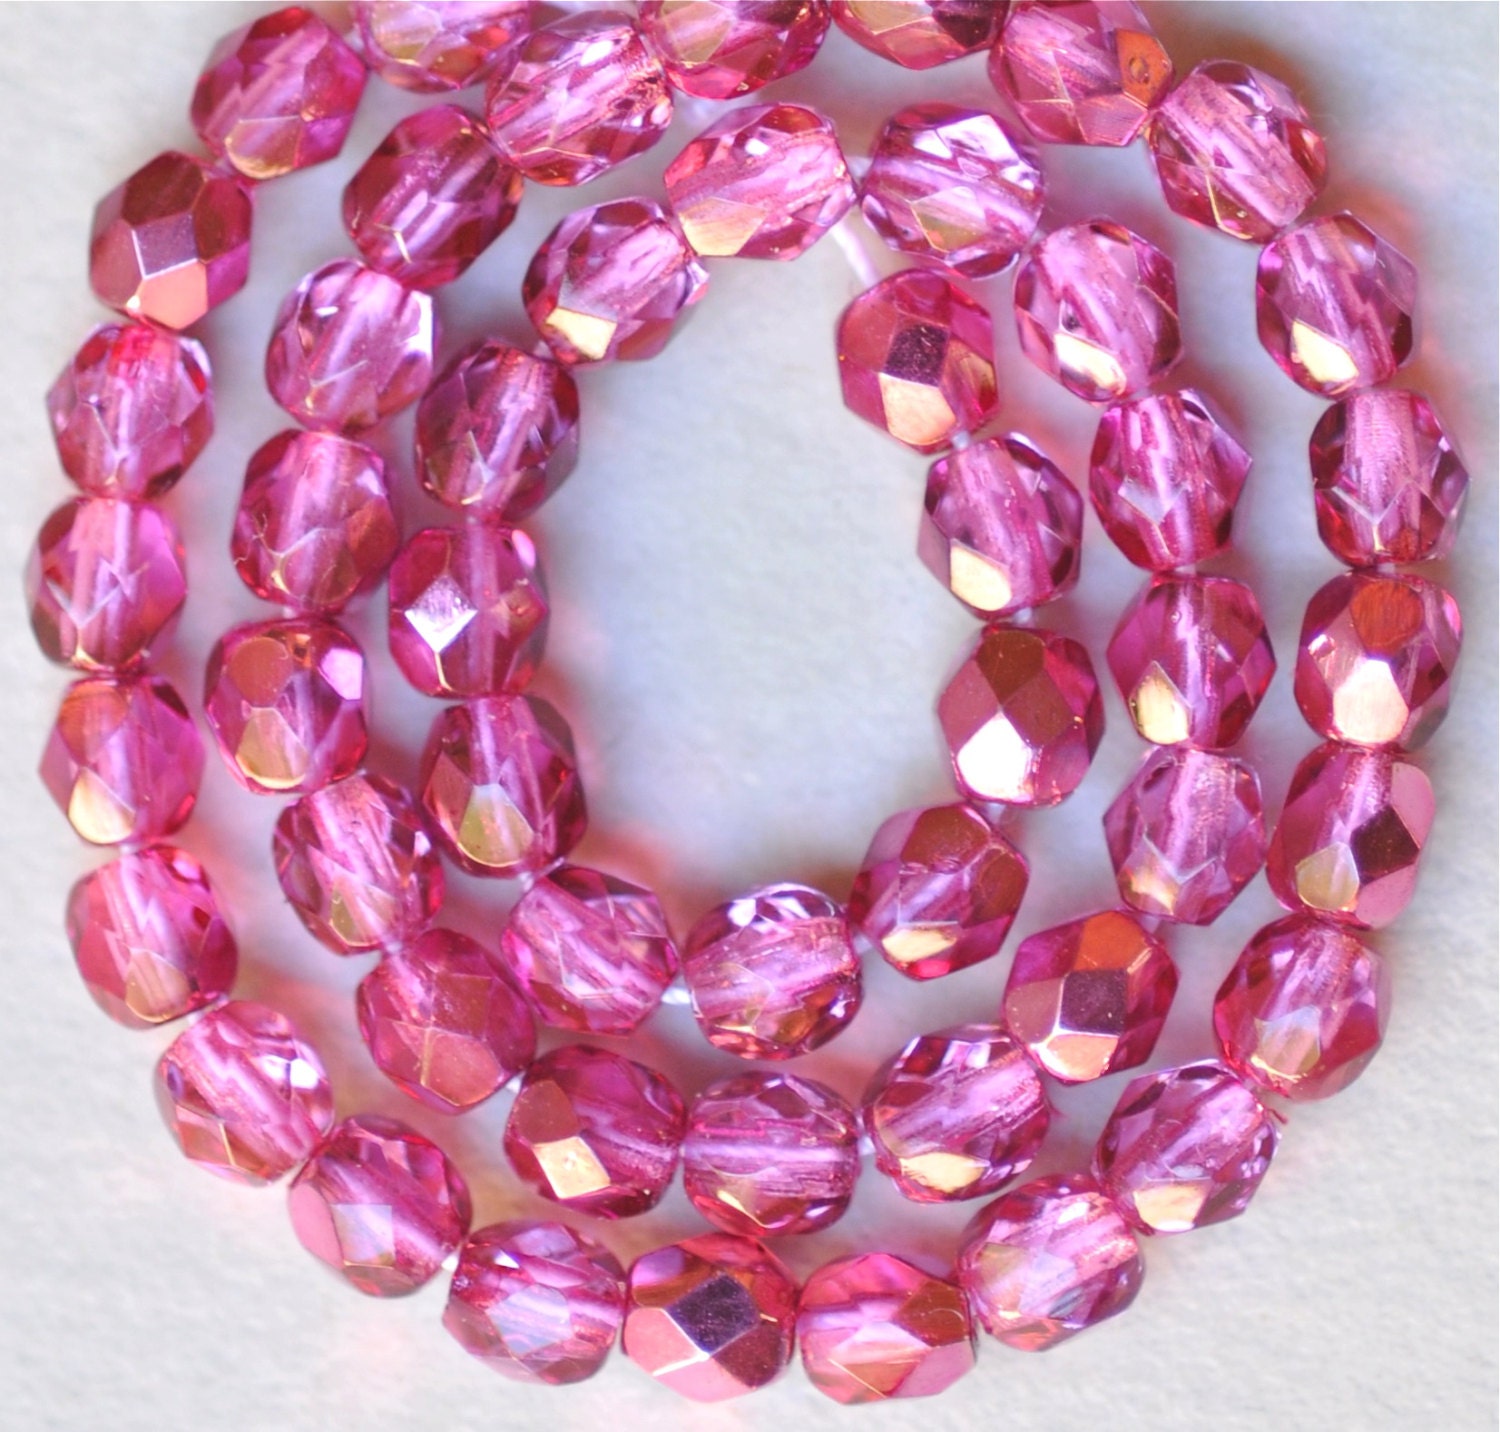 600 pcs 3mm Fire Polished Faceted Glass Beads, Crystal Copper Rainbow,  Shiny Scara Beads for Jewelry Making - Get Inspired with Czech Faceted Beads